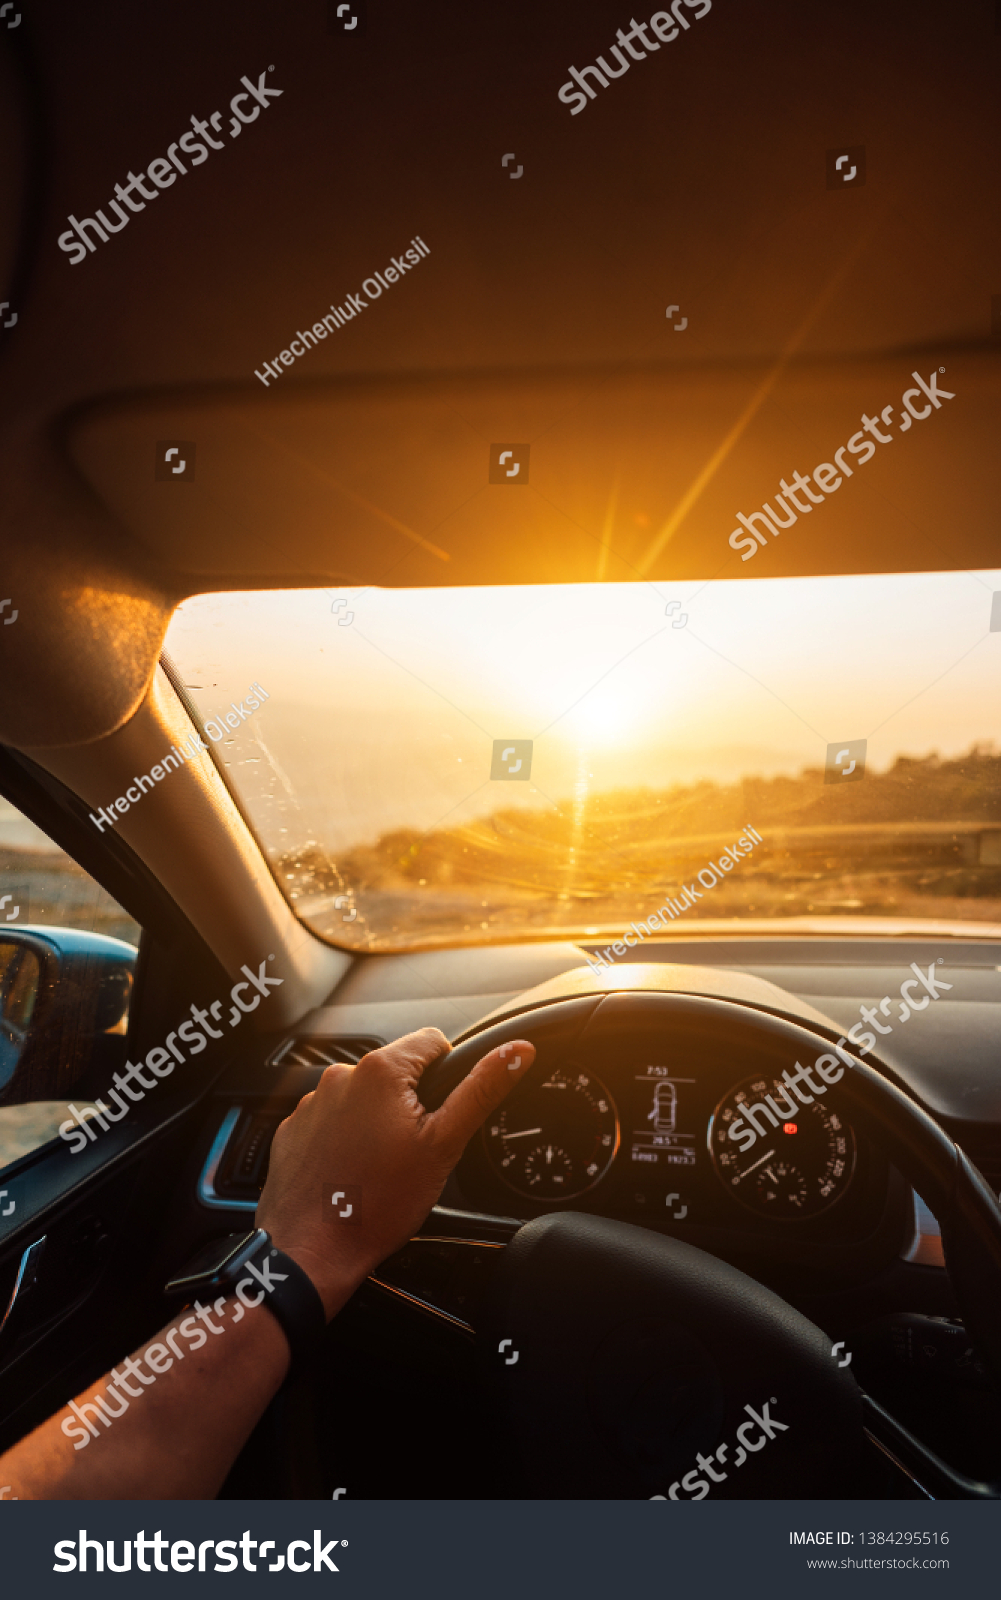 The road to success - a driver traveling on a road #1384295516